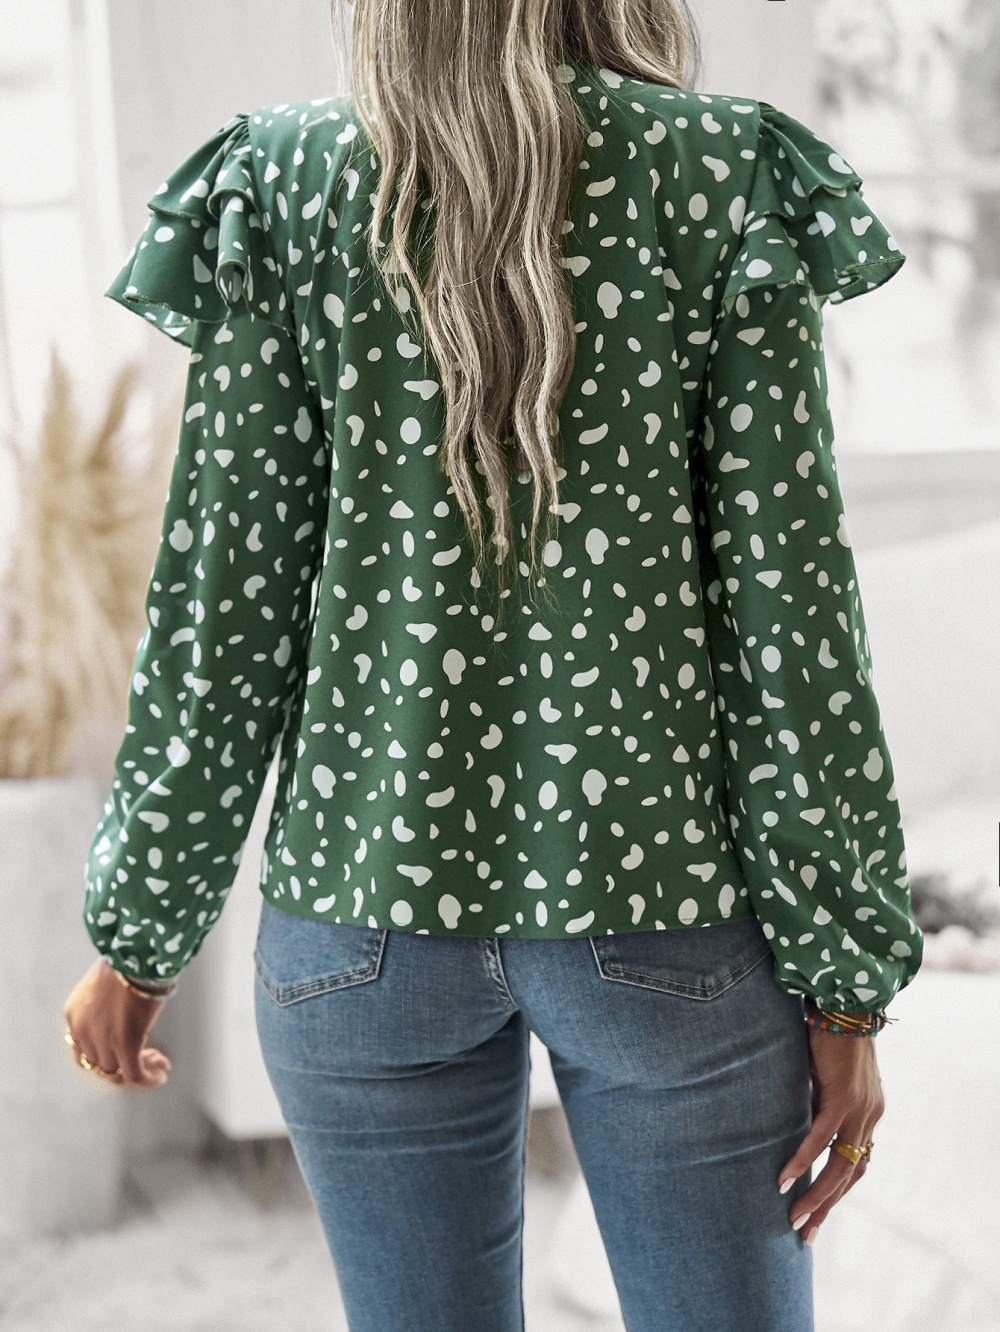 Lotus sleeve spring and summer tops Casual shirt for women